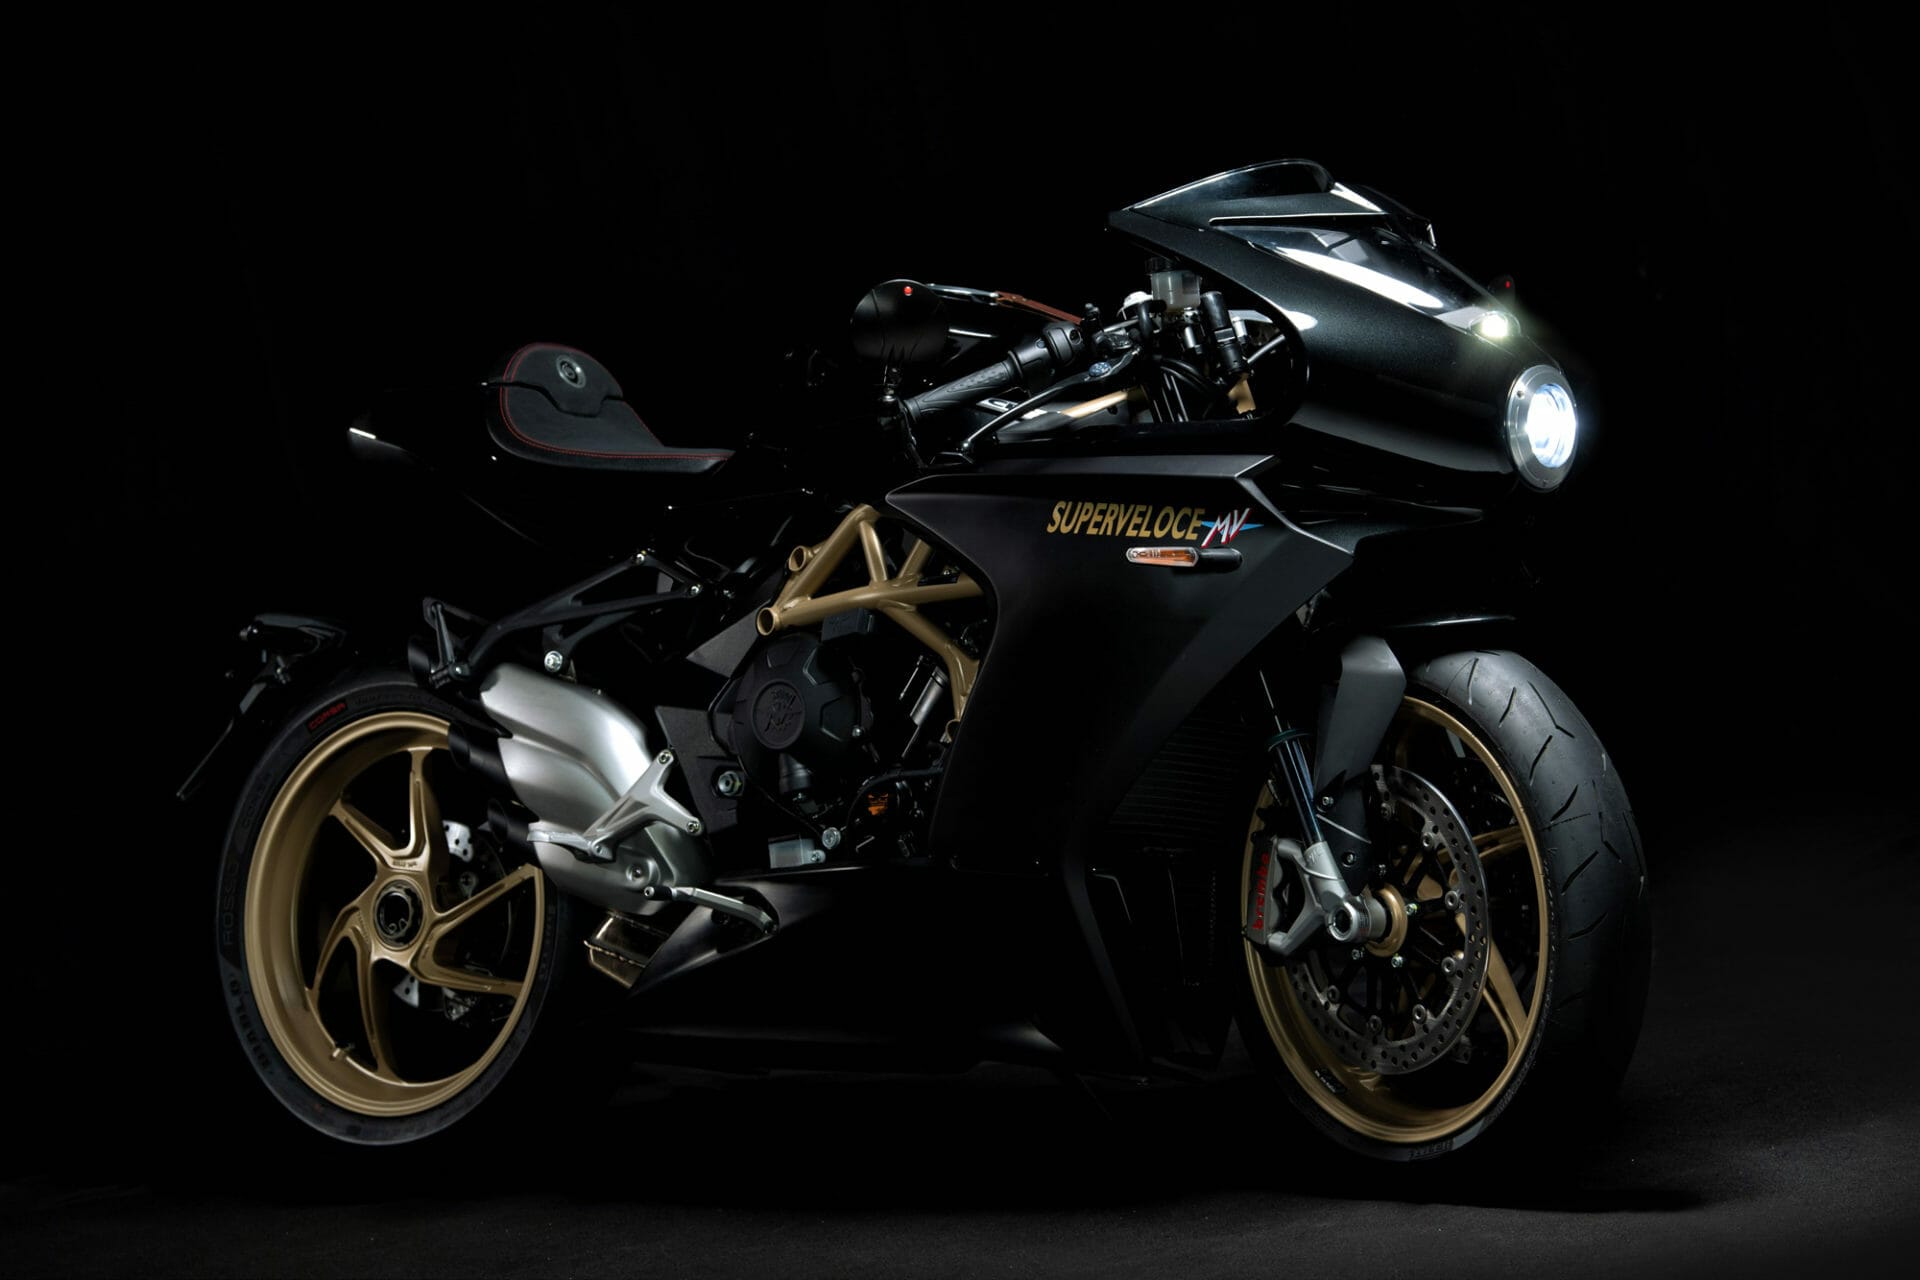 MV Agusta Superveloce 800 - 2021
- also in the App MOTORCYCLE NEWS